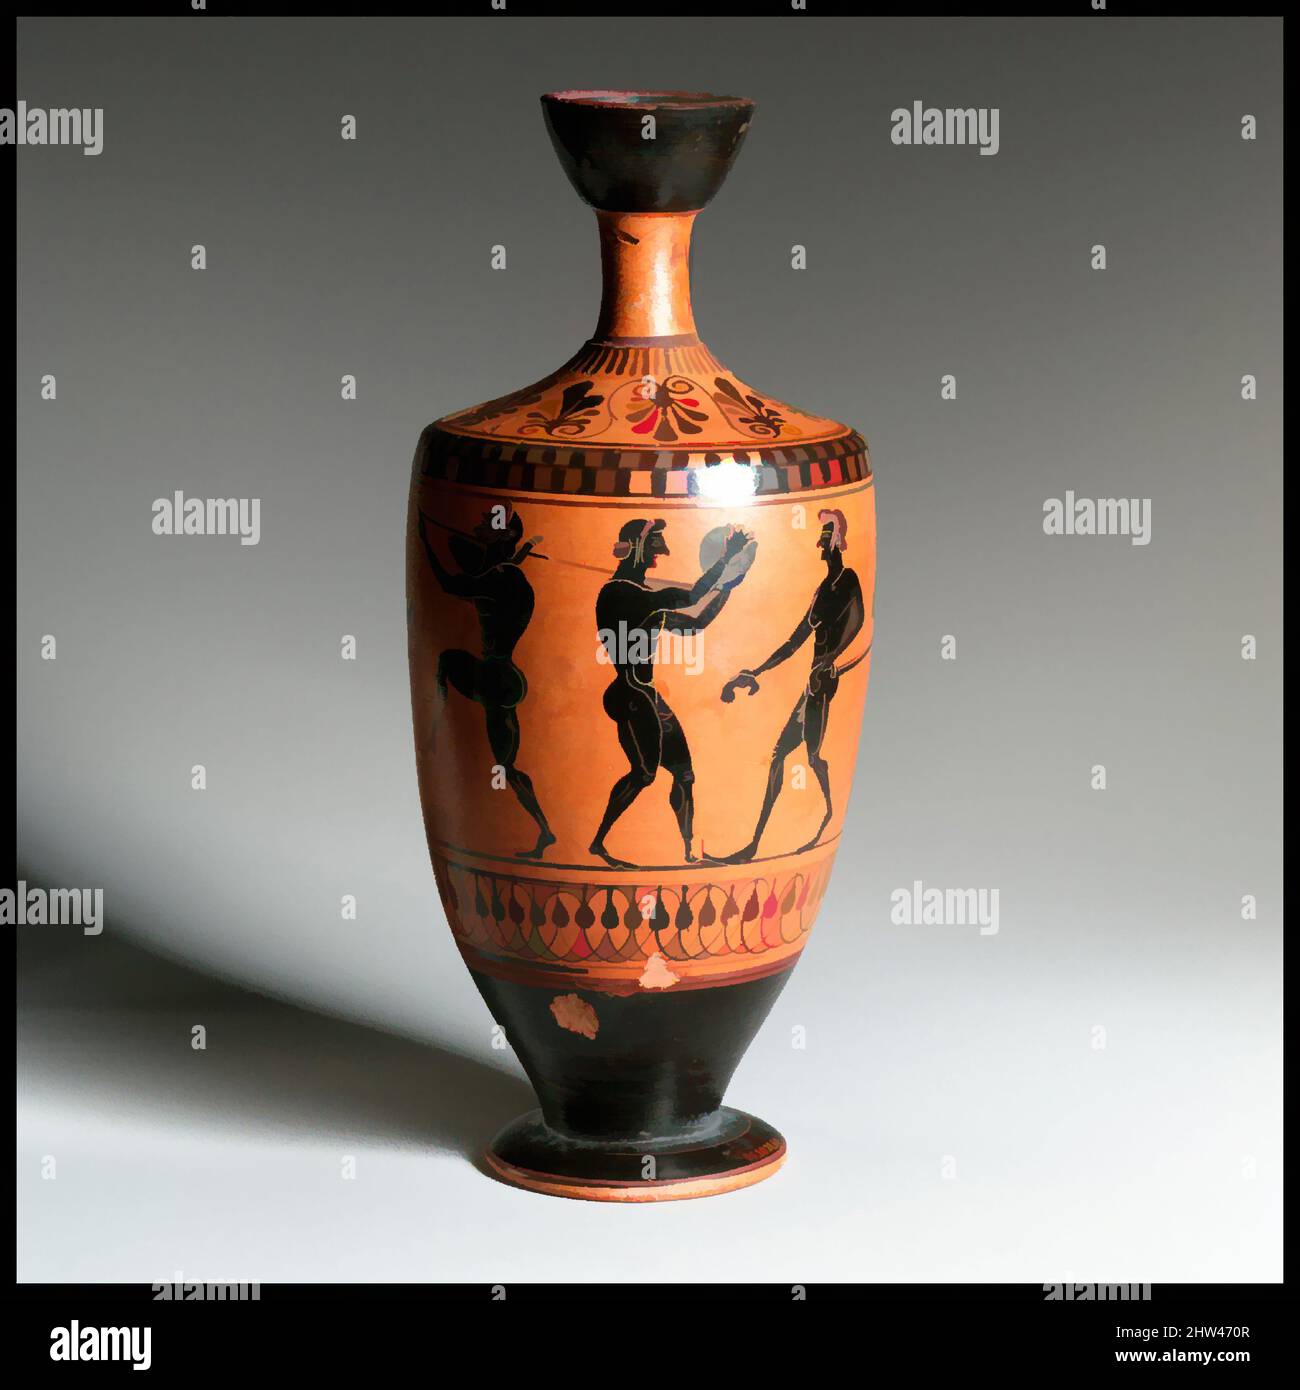 Art inspired by Terracotta lekythos (oil flask), Archaic, late 6th century B.C., Greek, Attic, Terracotta; black-figure, H. 9 5/16 in. (23.7 cm), Vases, Five athletes practicing. The youths and the man are depicted with diskoi, jumping weights, and javelins, Classic works modernized by Artotop with a splash of modernity. Shapes, color and value, eye-catching visual impact on art. Emotions through freedom of artworks in a contemporary way. A timeless message pursuing a wildly creative new direction. Artists turning to the digital medium and creating the Artotop NFT Stock Photo